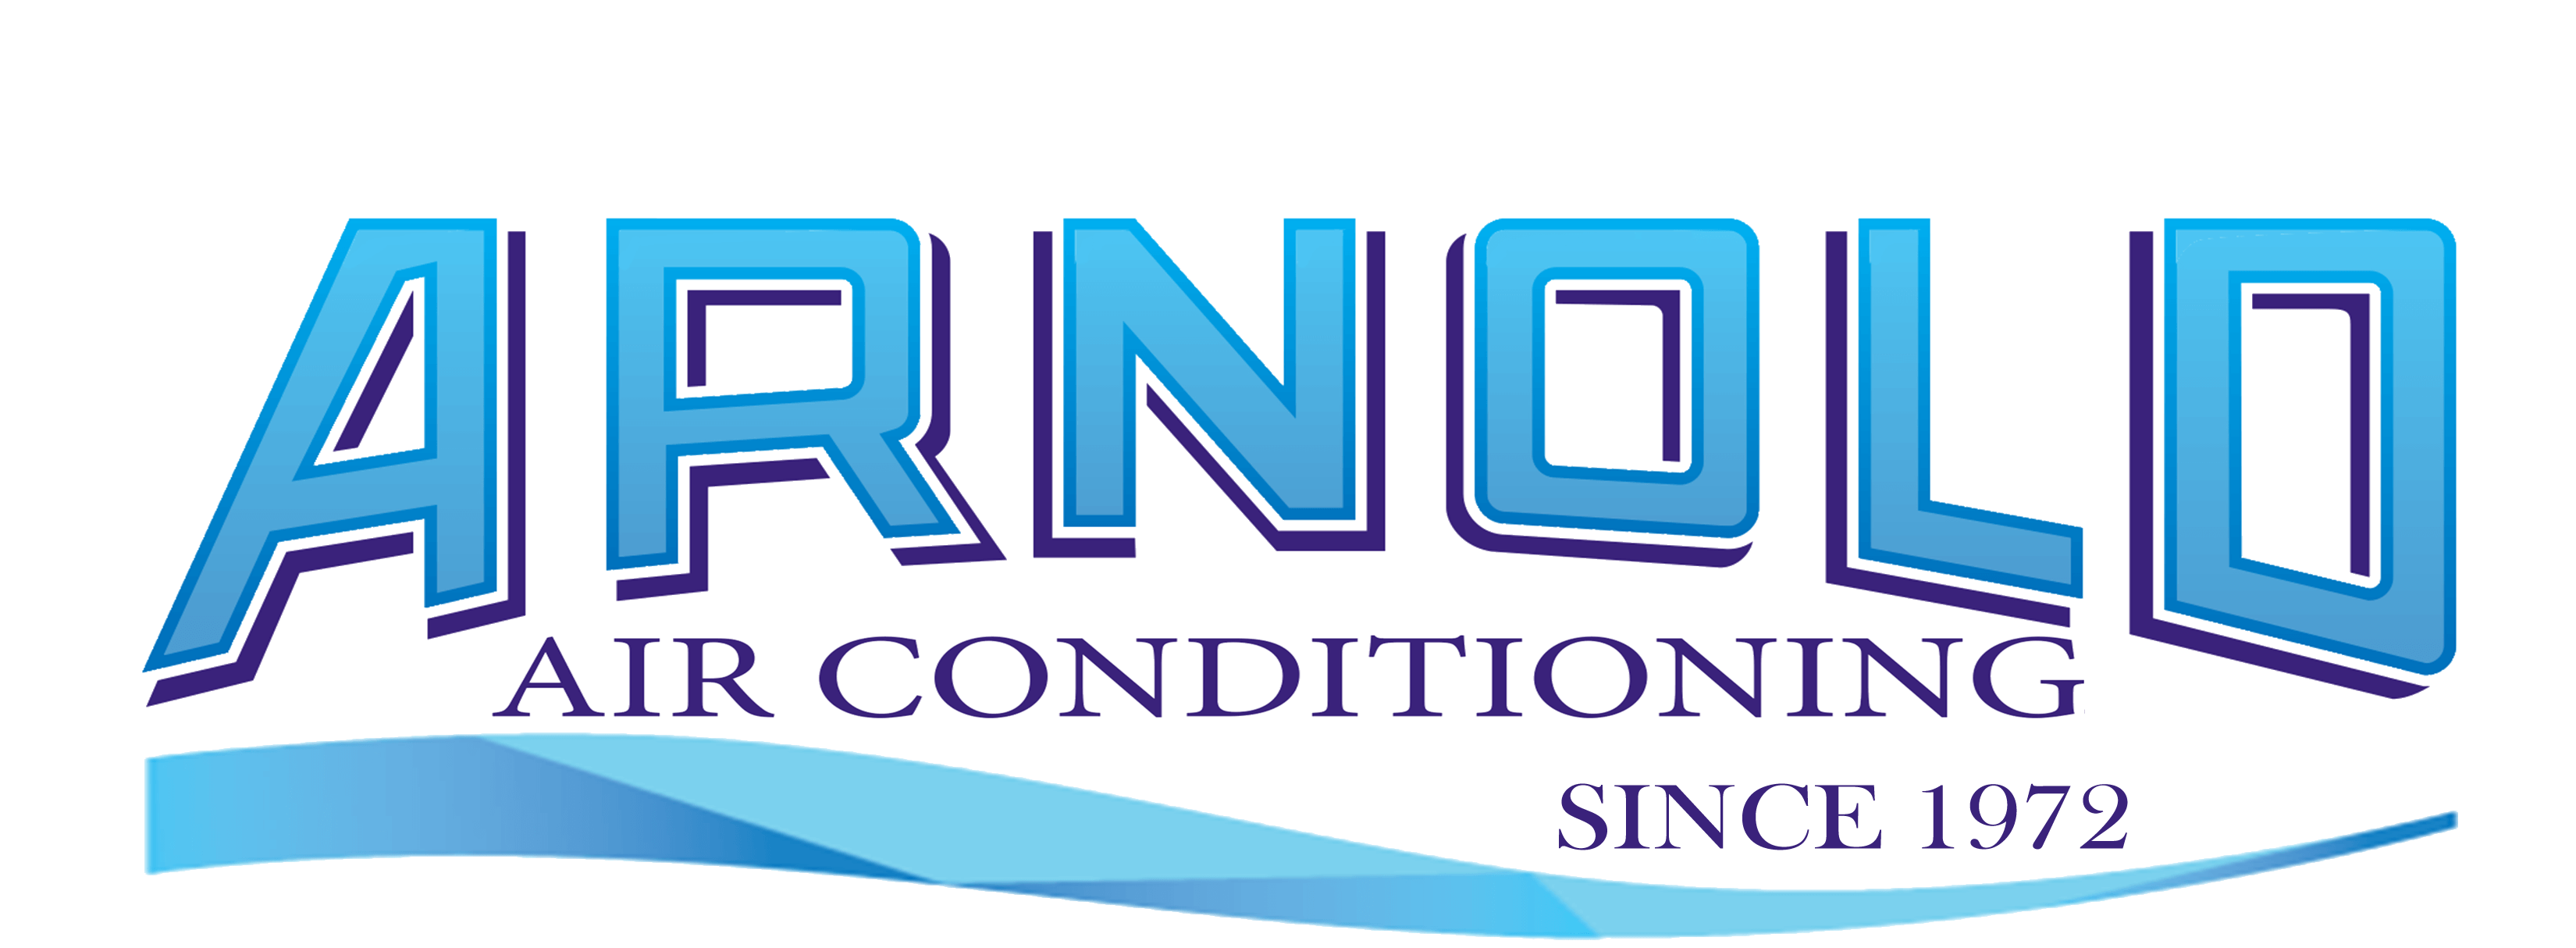 Arnold Air Conditioning, Inc.